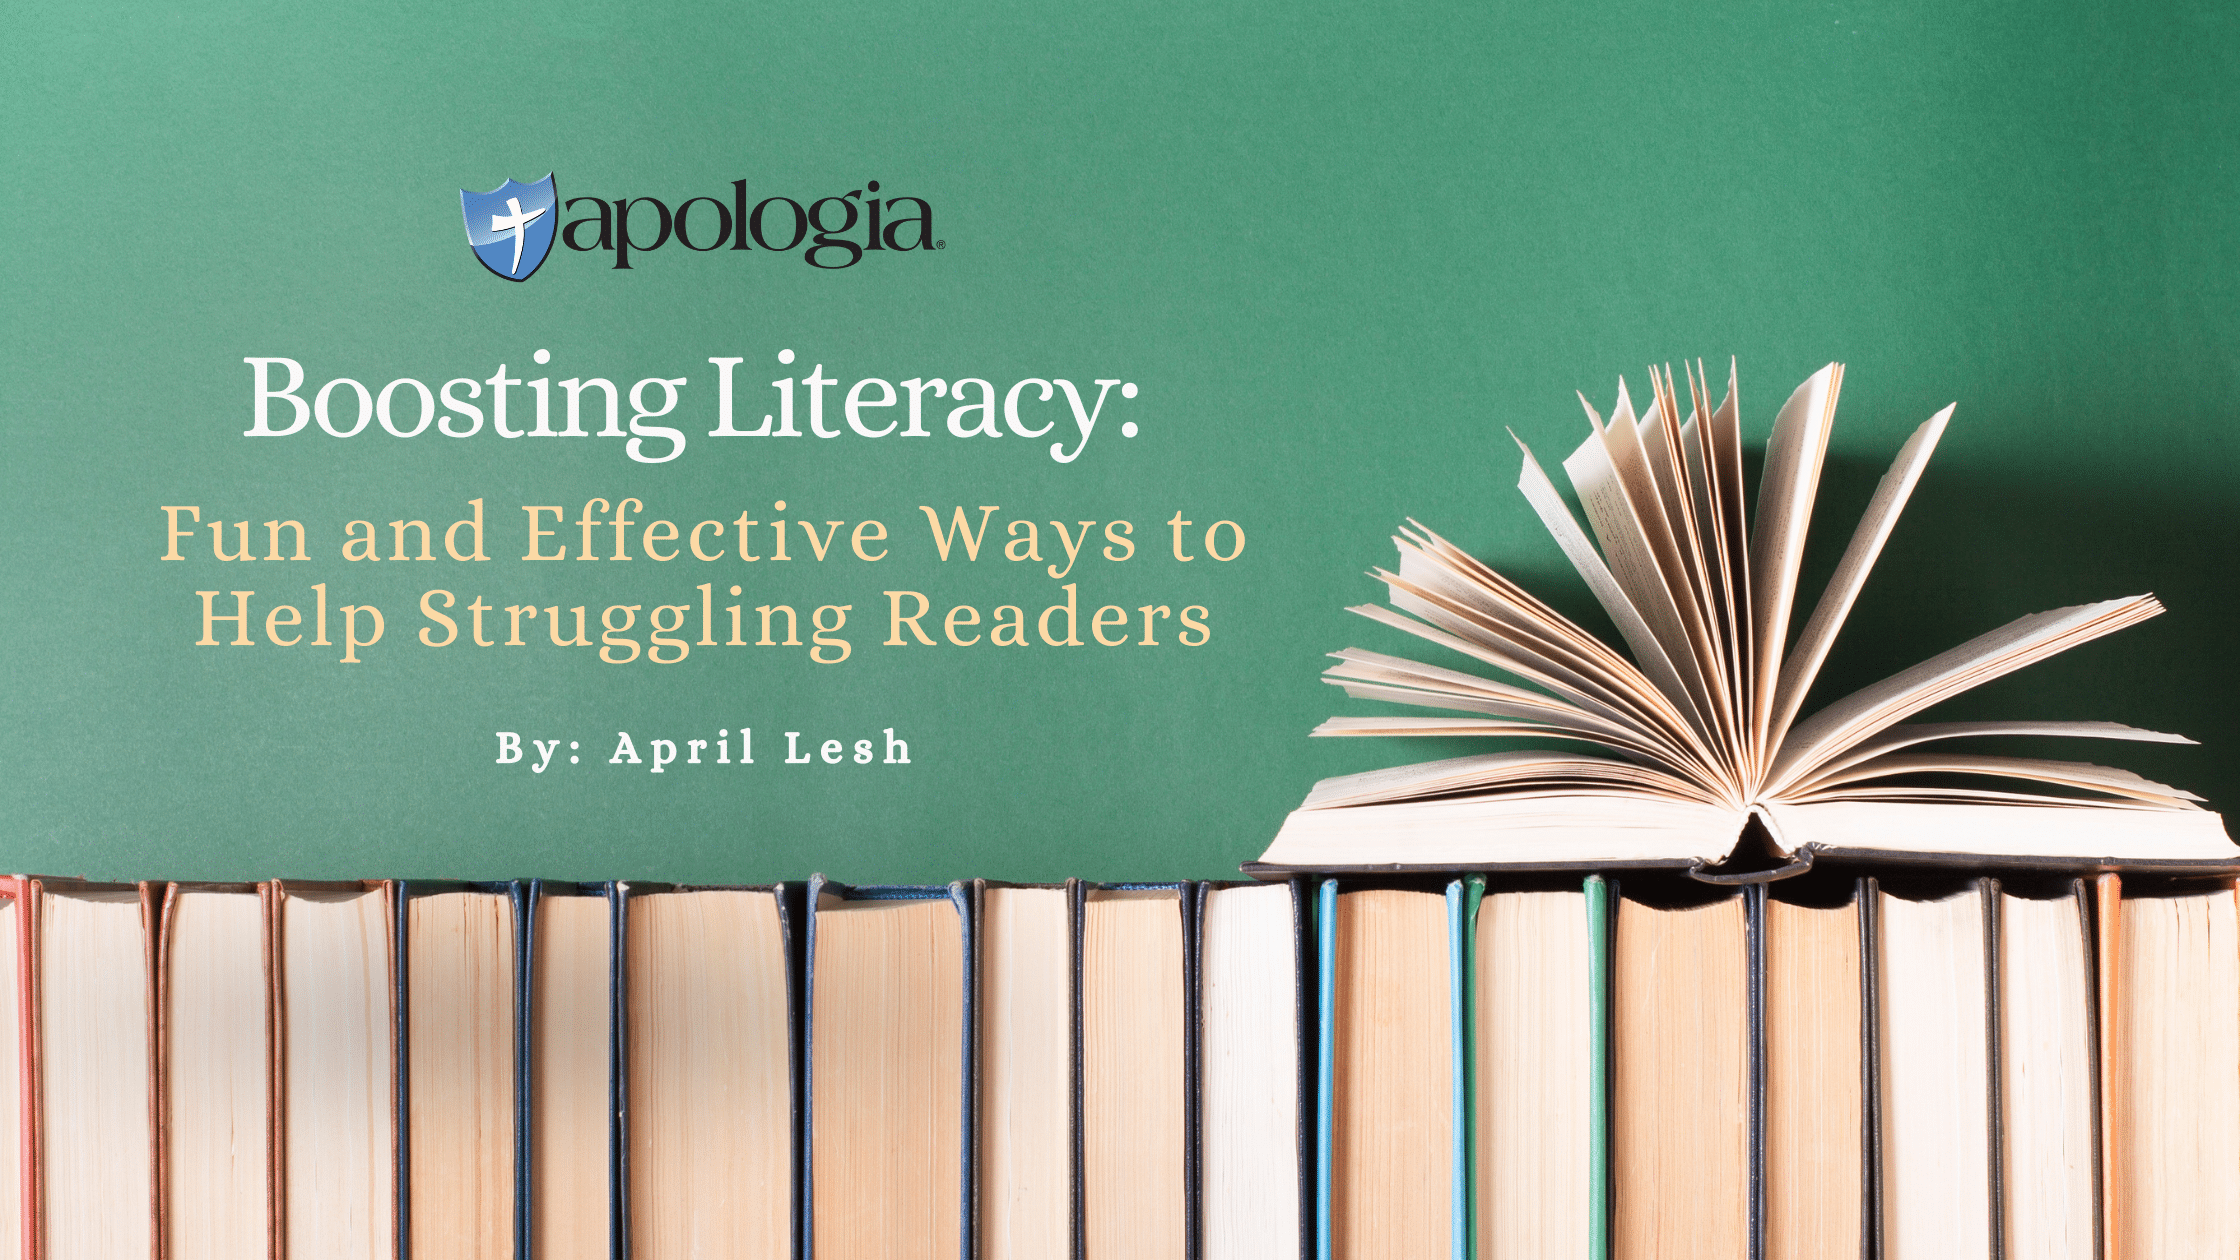 Boosting Literacy: Fun and Effective Ways to Help Struggling Readers